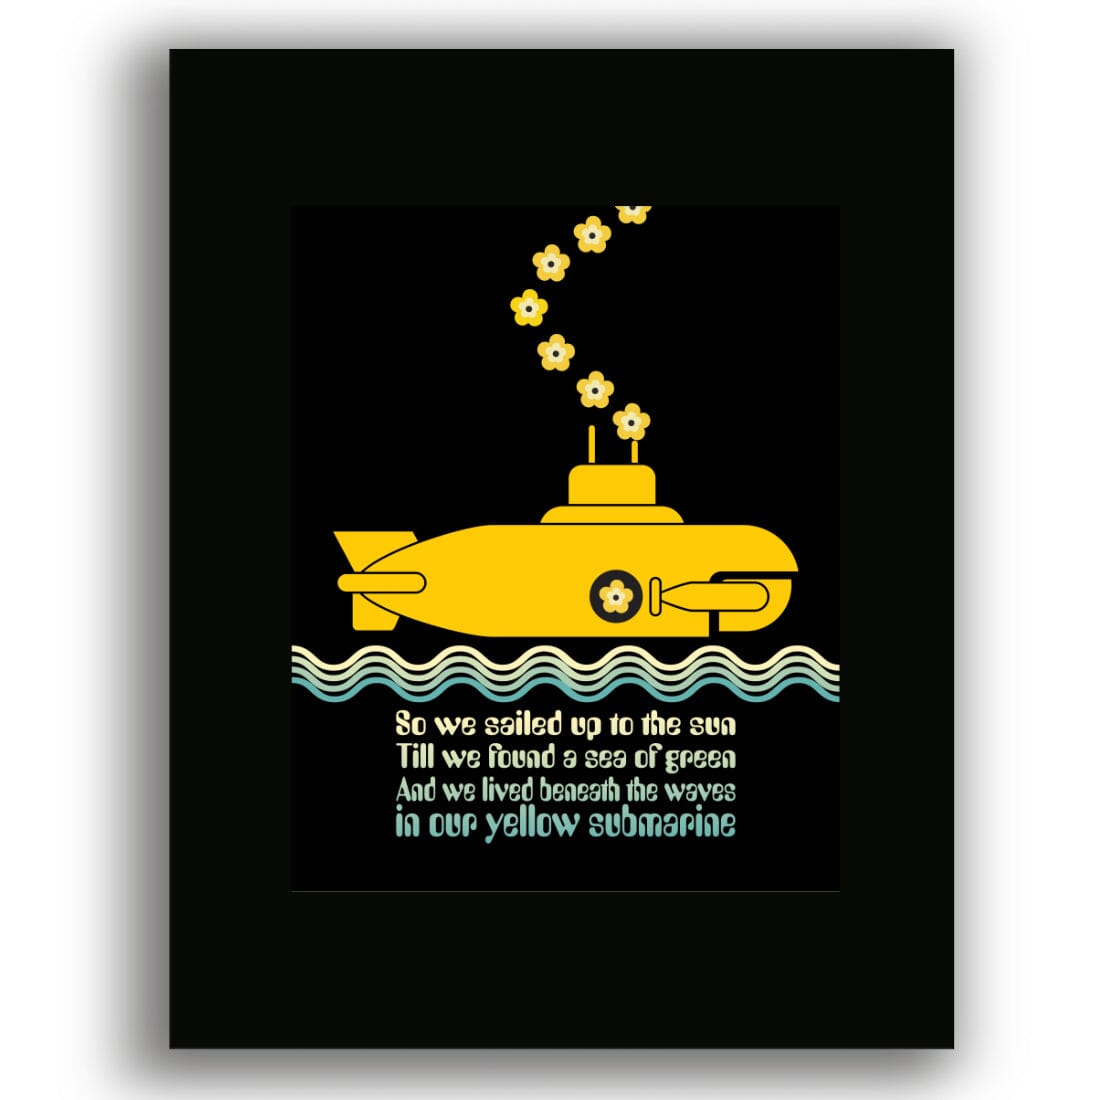 Yellow Submarine by the Beatles - Print Song Lyric Music Art Song Lyrics Art Song Lyrics Art 8x10 Black Matted Print 